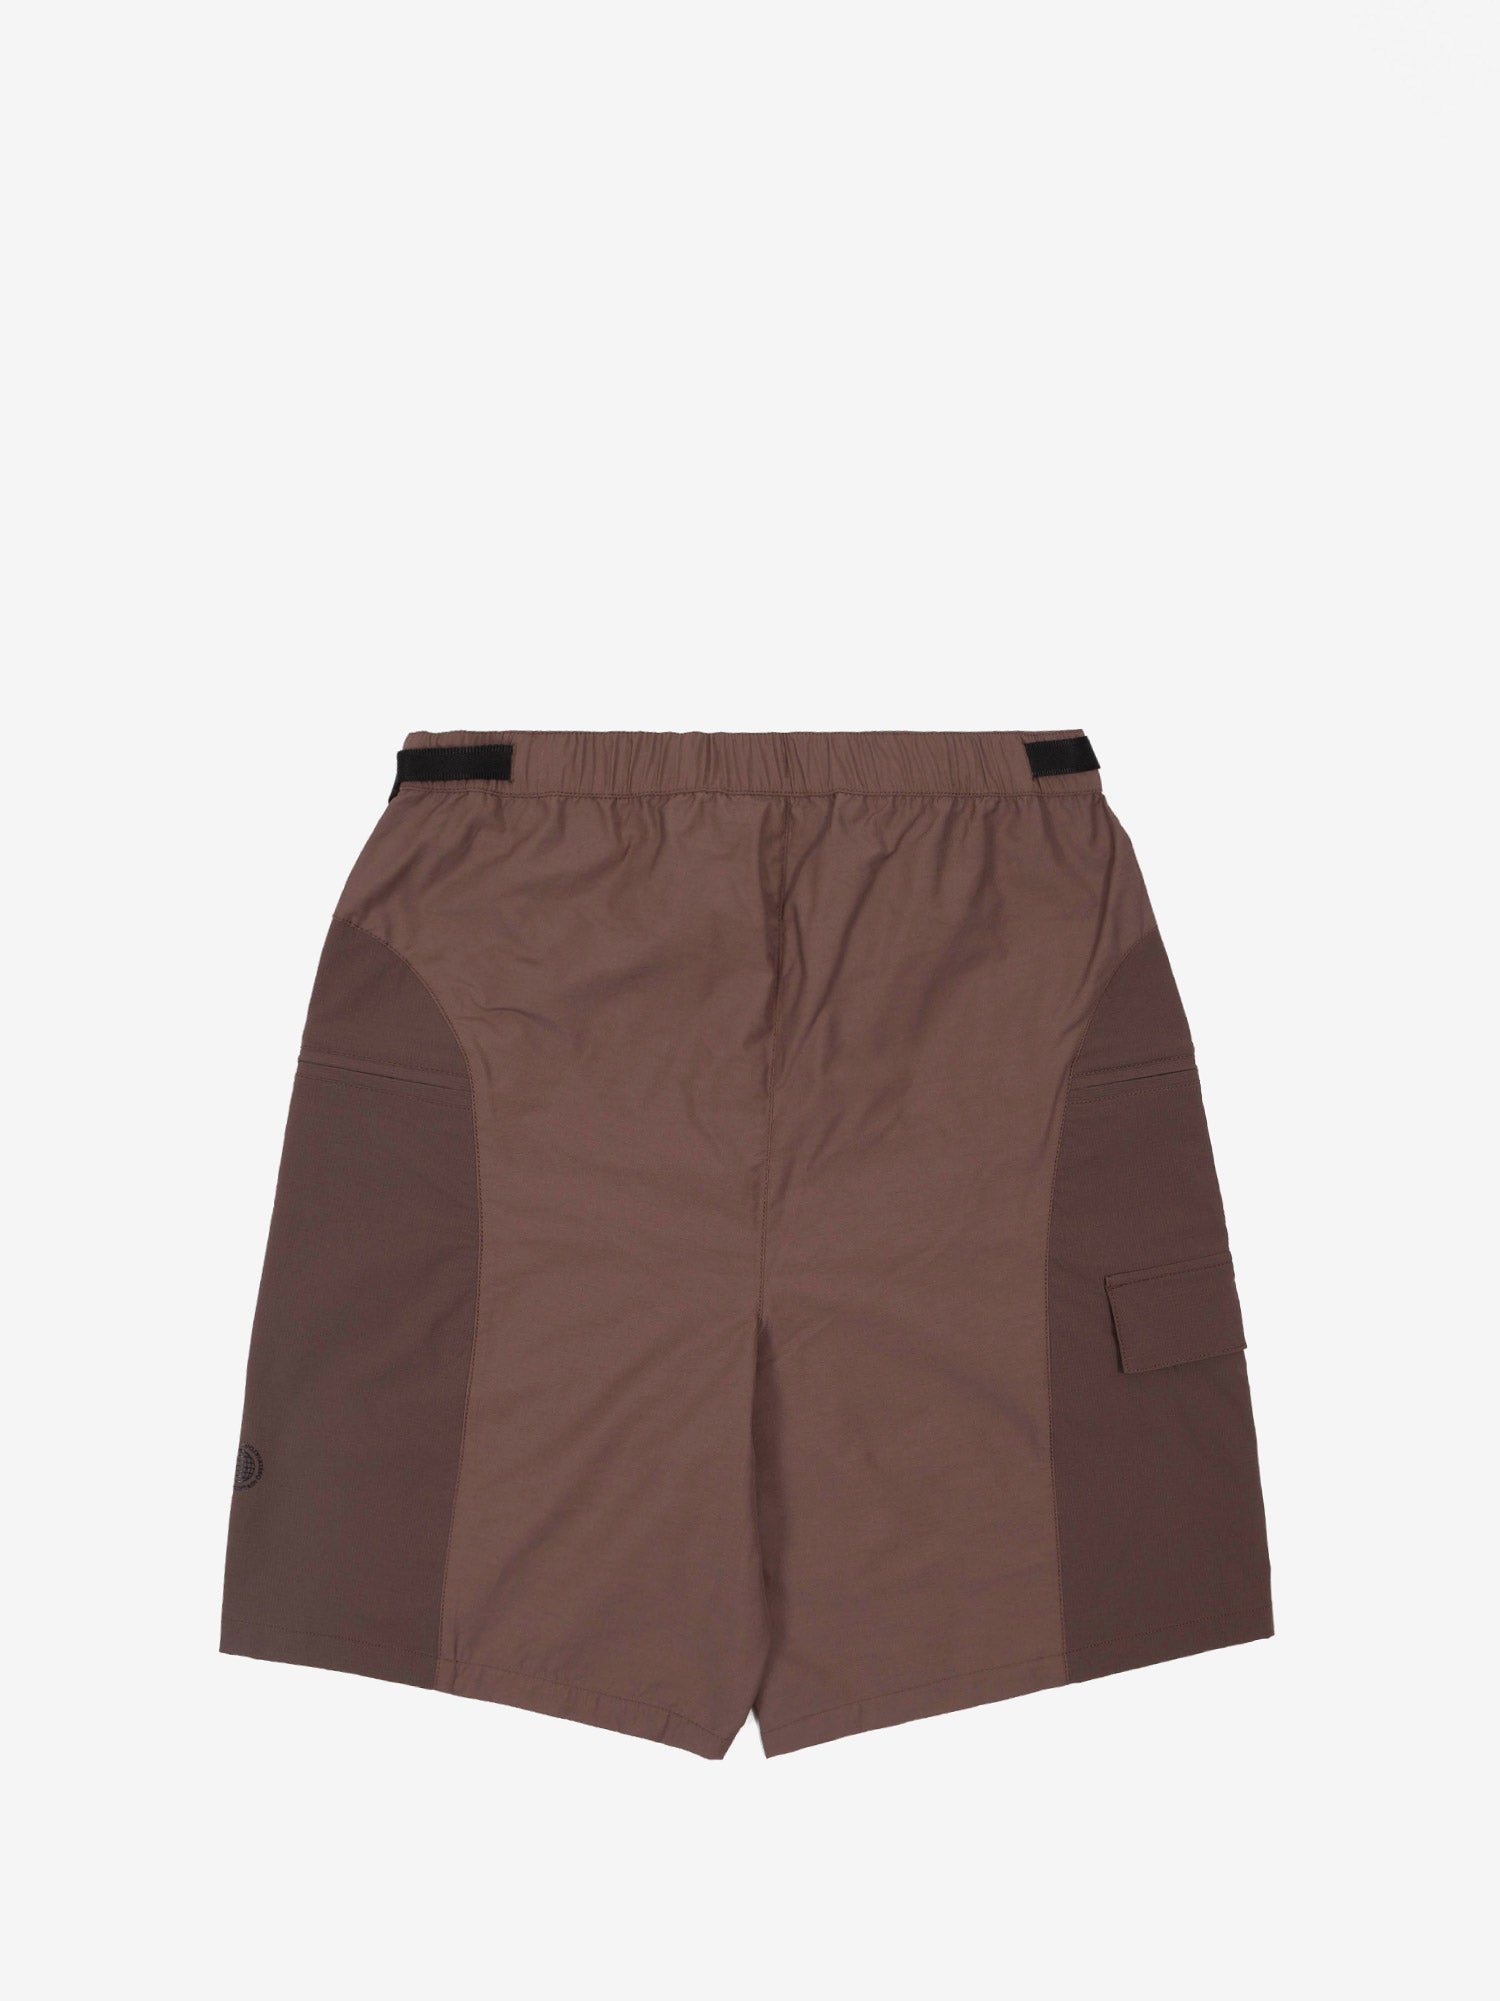 PMO Expedition Short Brown